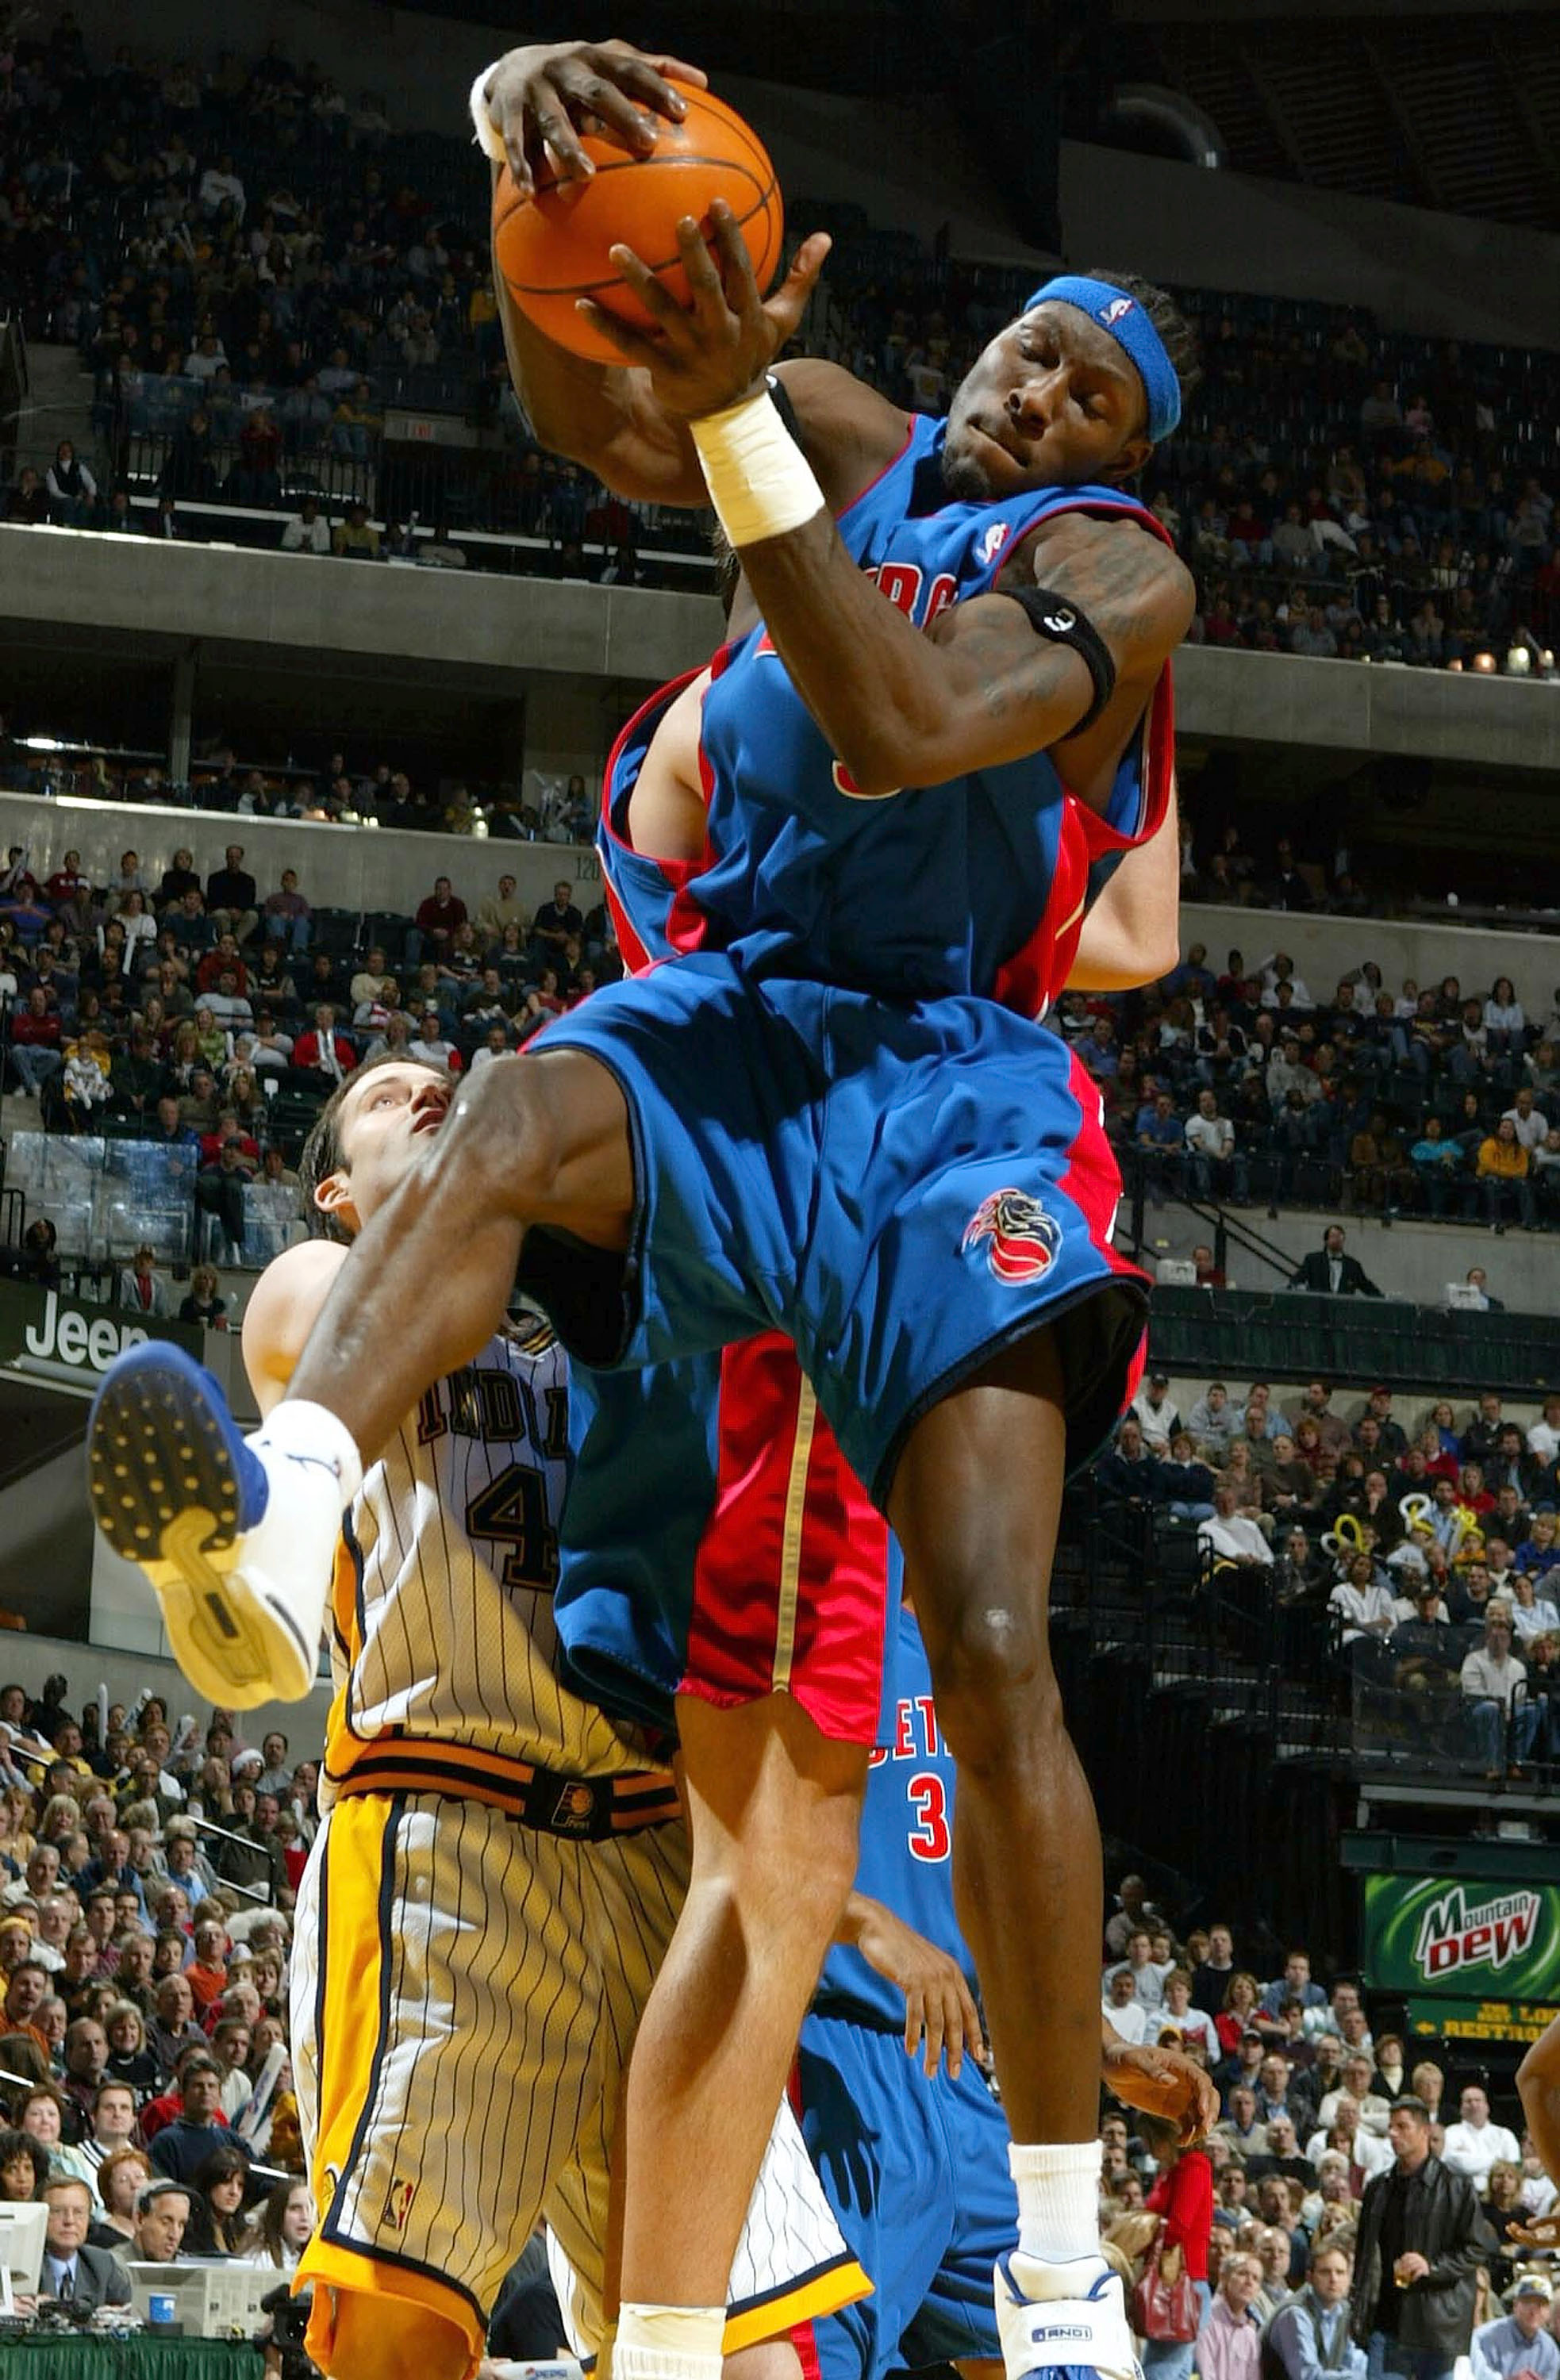 INDIANAPOLIS - DECEMBER 19:  Ben Wallace #3 of the Detroit Pistons grabs a rebound against the Indiana Pacers on December19, 2003 at Conseco Fieldhouse in Indianapolis, Indiana. NOTE TO USER: User expressly acknowledges and agress that, by downloading and